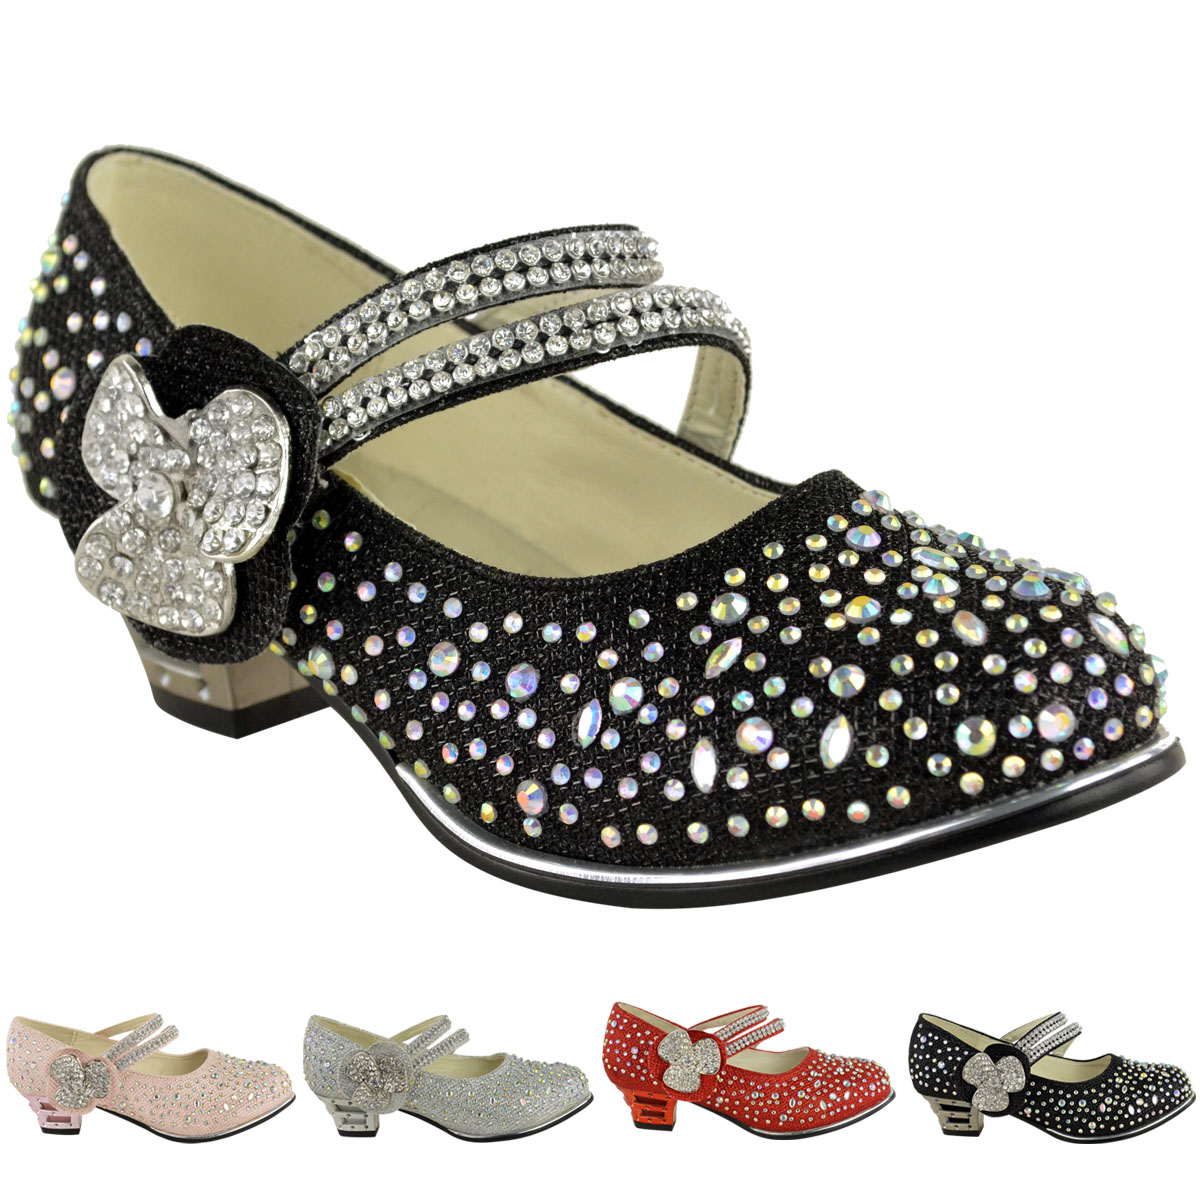 CHILDRENS GIRLS KIDS Low Mid High Heel Diamante Party Shoes Bridal ...